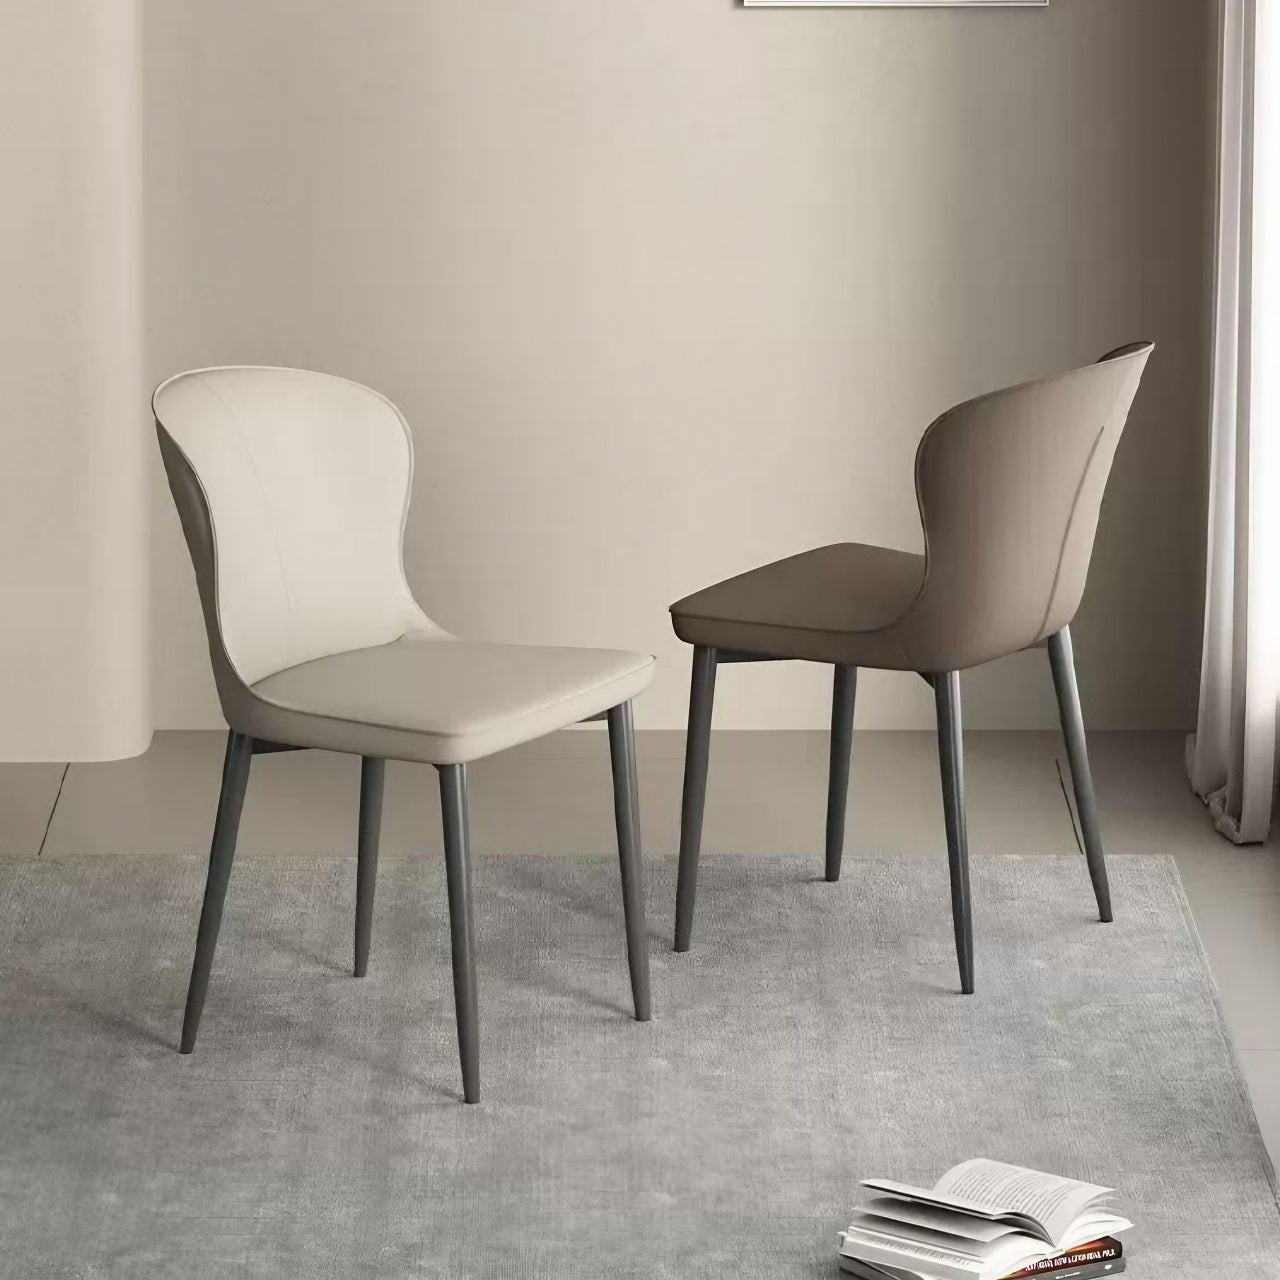 Contemporary minimalist single dining chair in brown durable leather